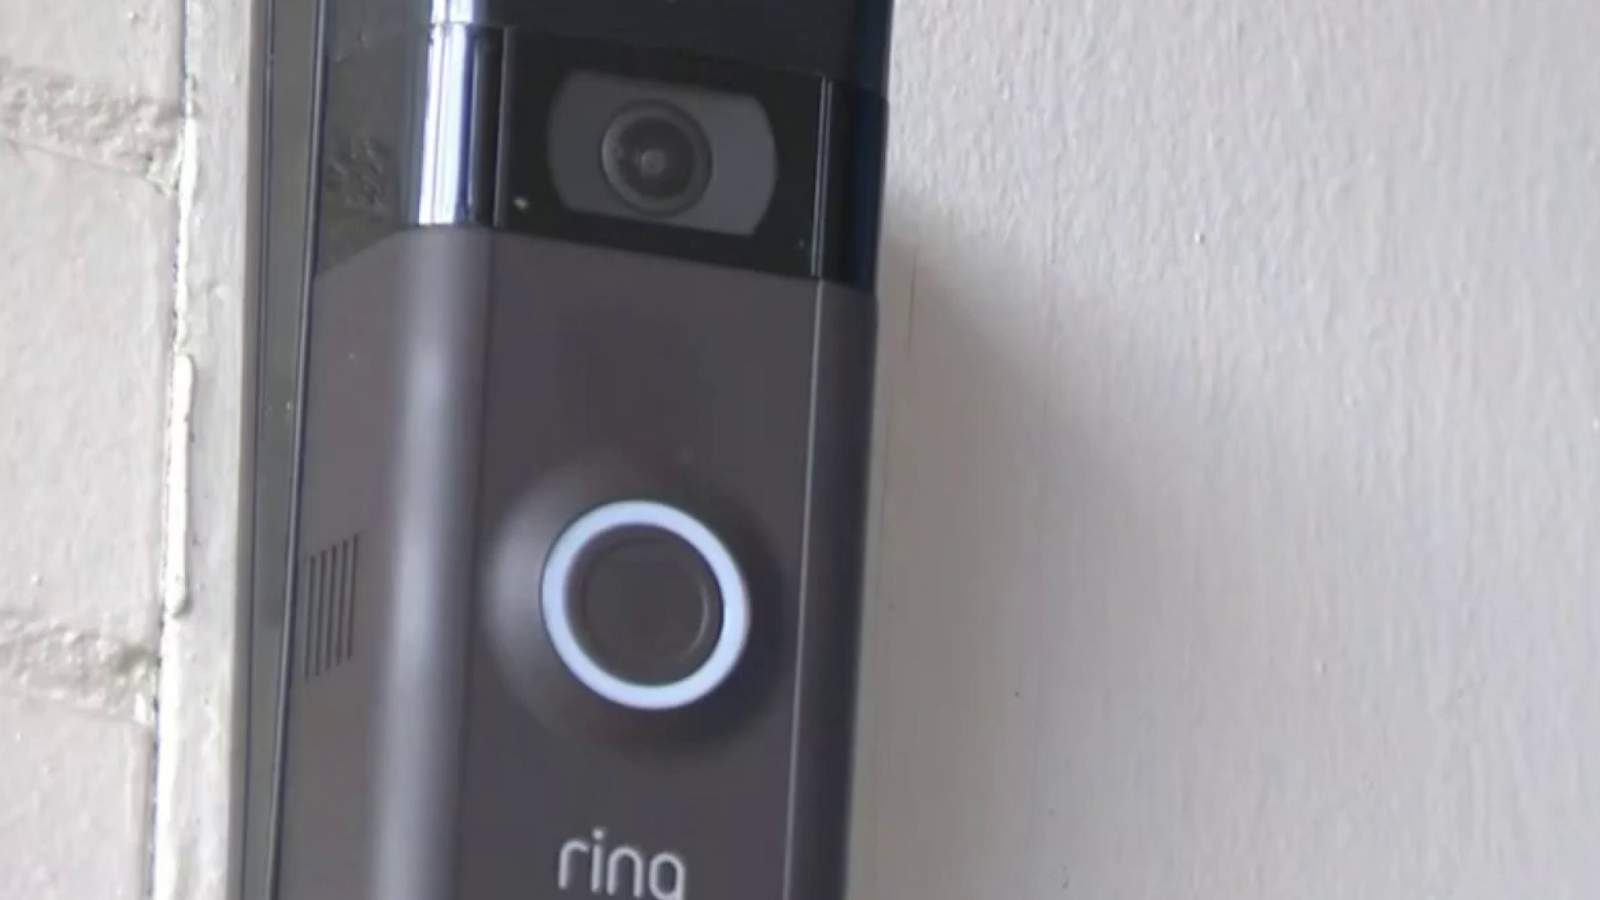 Ring recalls hundreds of thousands of video doorbells due to reports of them catching fire